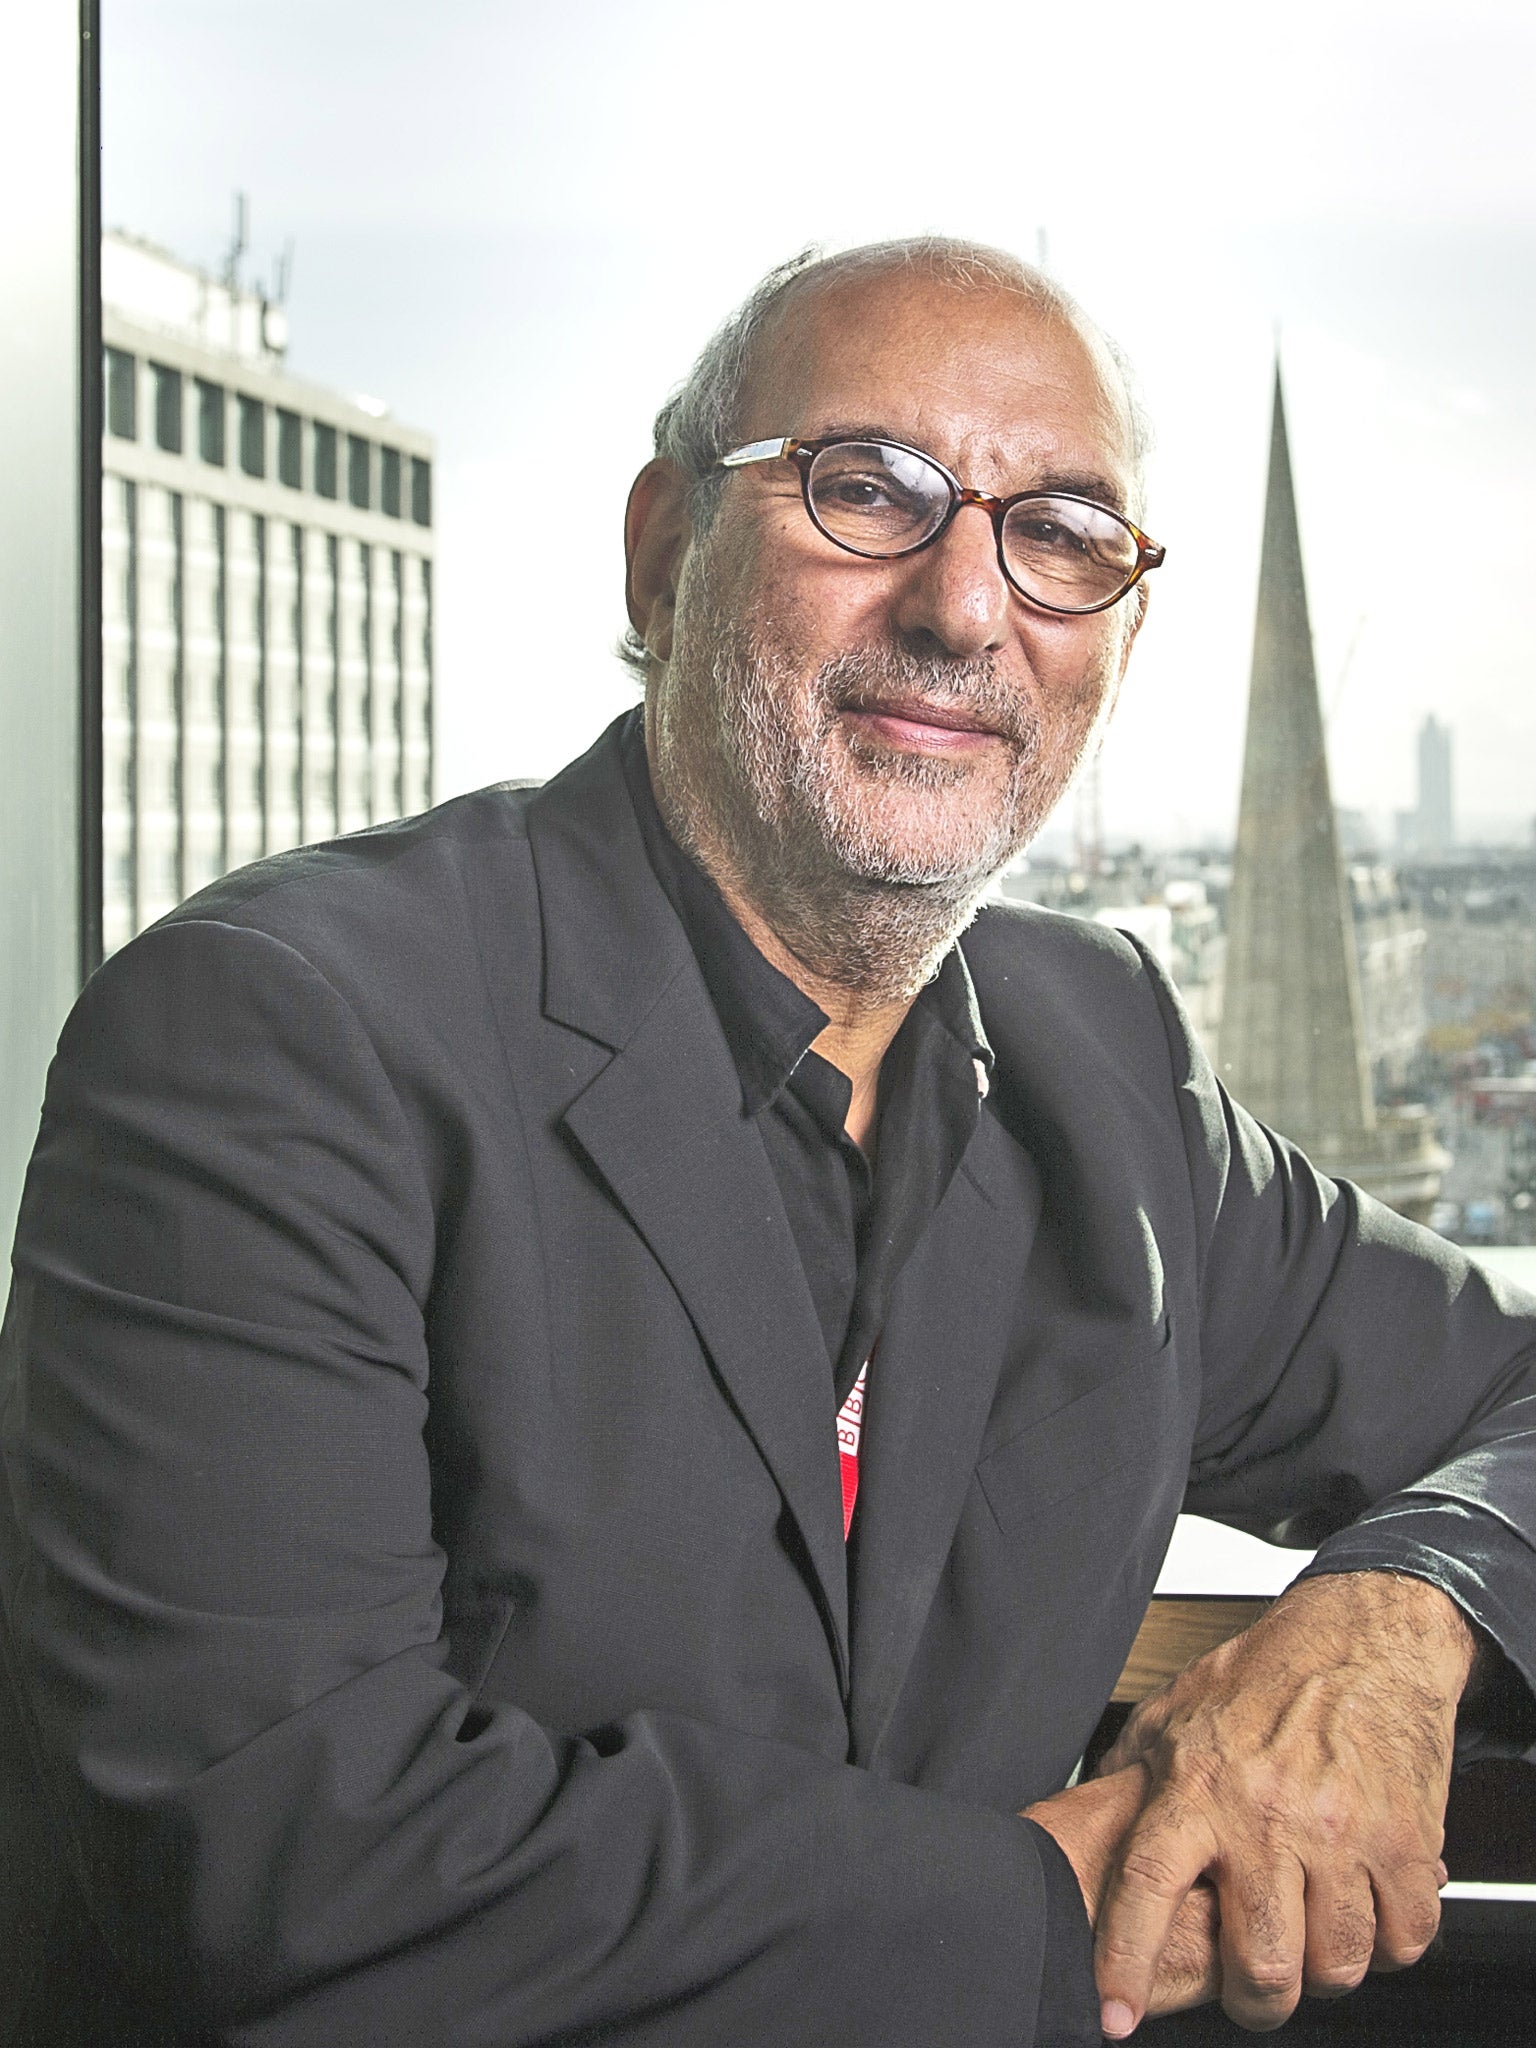 Alan yentob is the enduring face of the BBC corporation